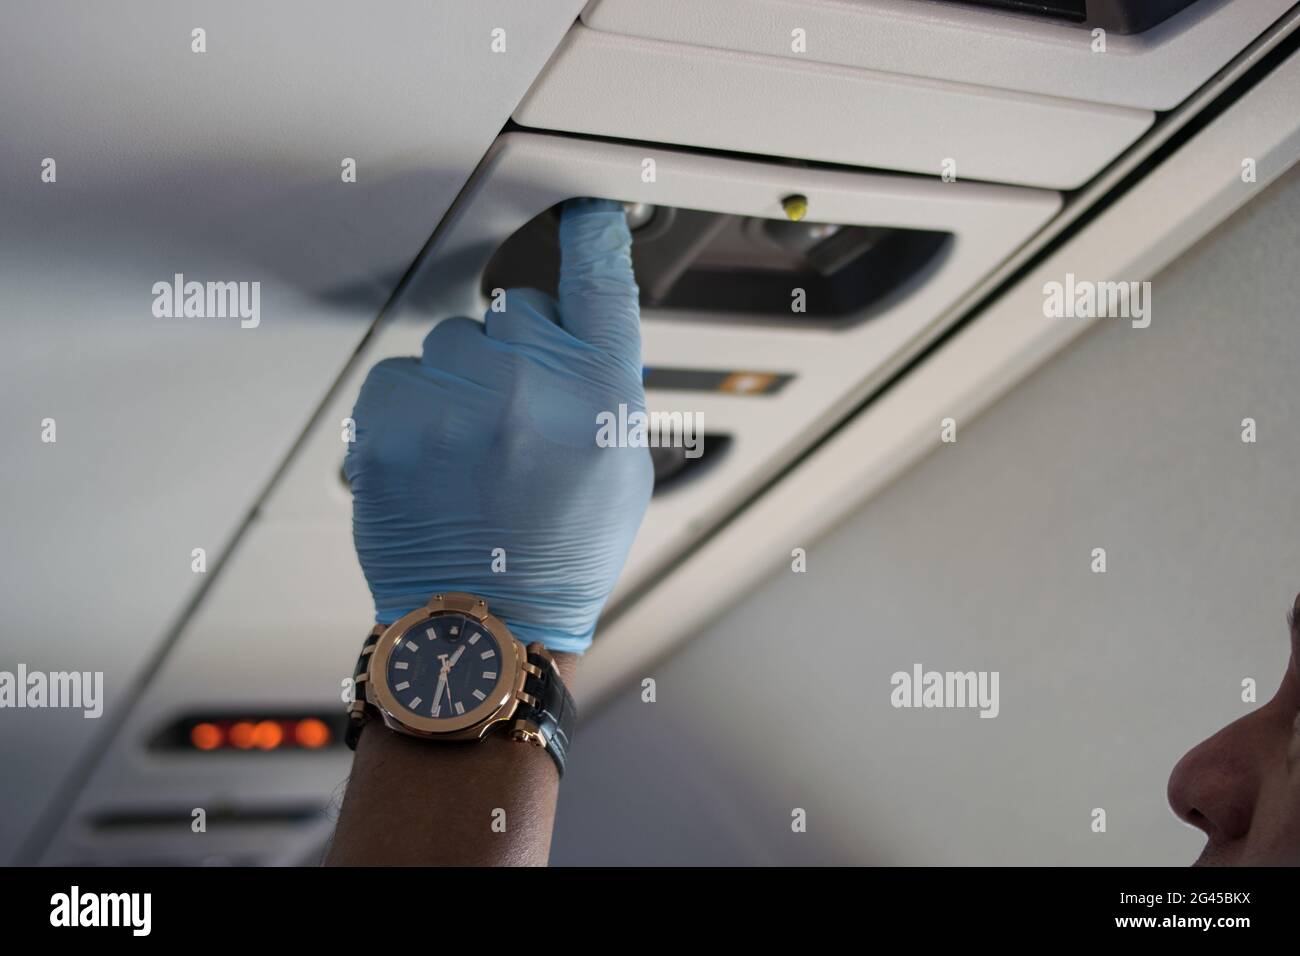 A men using a set of surgical gloves press a button in the cabbin of the plane as the Colombian government sponsored free repatriation flights back to Colombia admist the novel Coronavirus (COVID-19) outbreak and the result of commercial flights grounded, in Miami, Florida, U.S, on August 7, 2020. Stock Photo